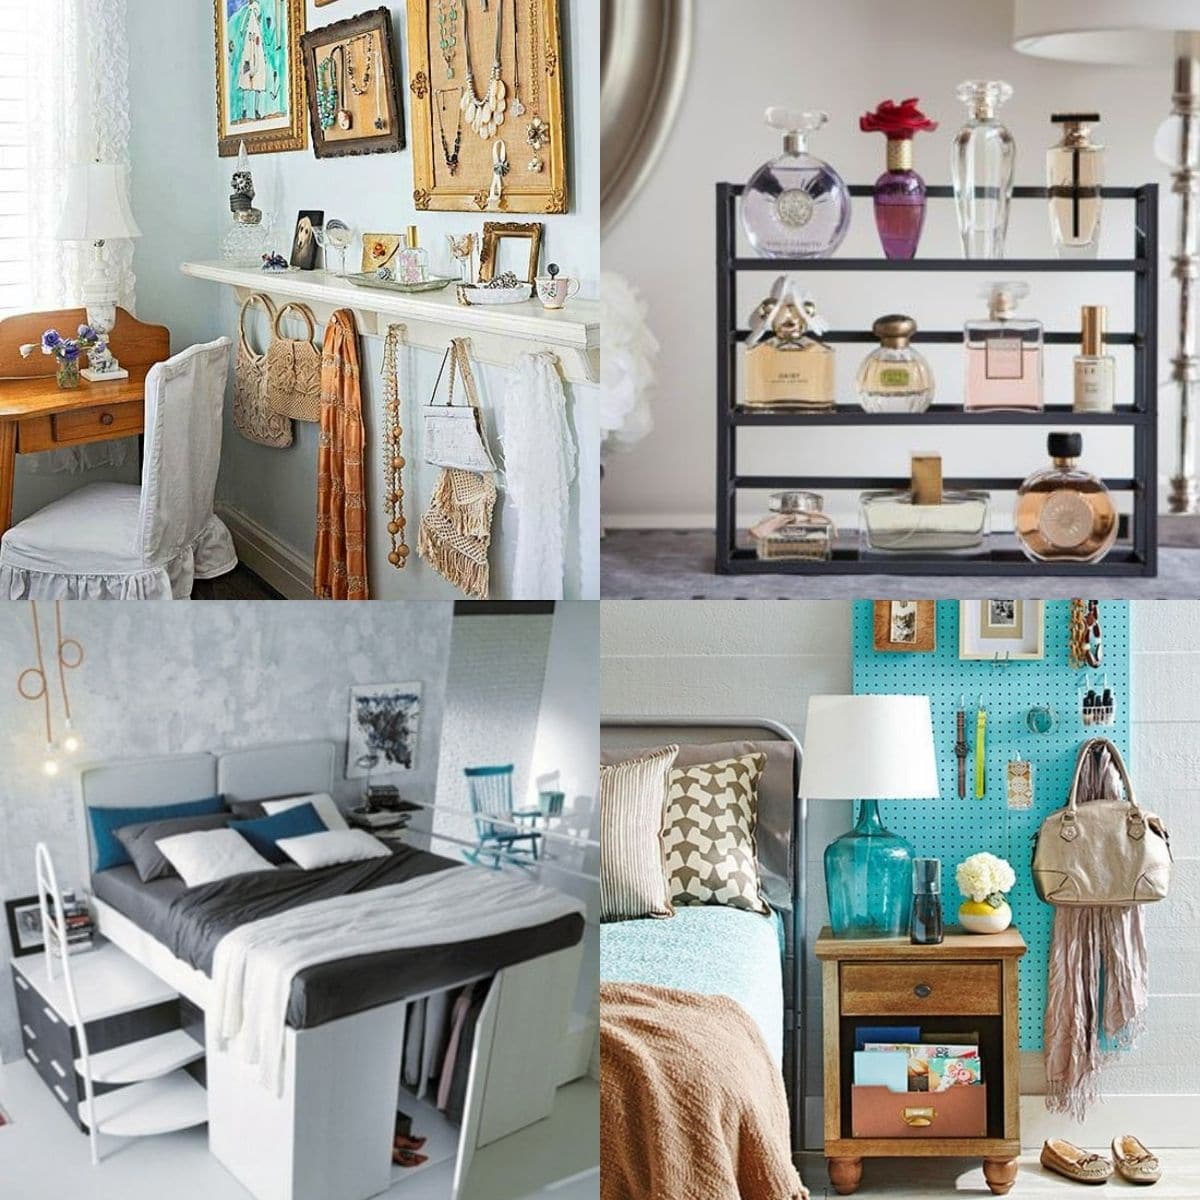 Increase storage in your small rooms with the fun hacks. Keep your room both organized and stylish. 😉 #Storage #StorageIDeas #StorageSpace #SmallRooms #SmallRoomStorage #SmallRoomStorageIDeas LocalInfoForYou.com/284487/small-r…